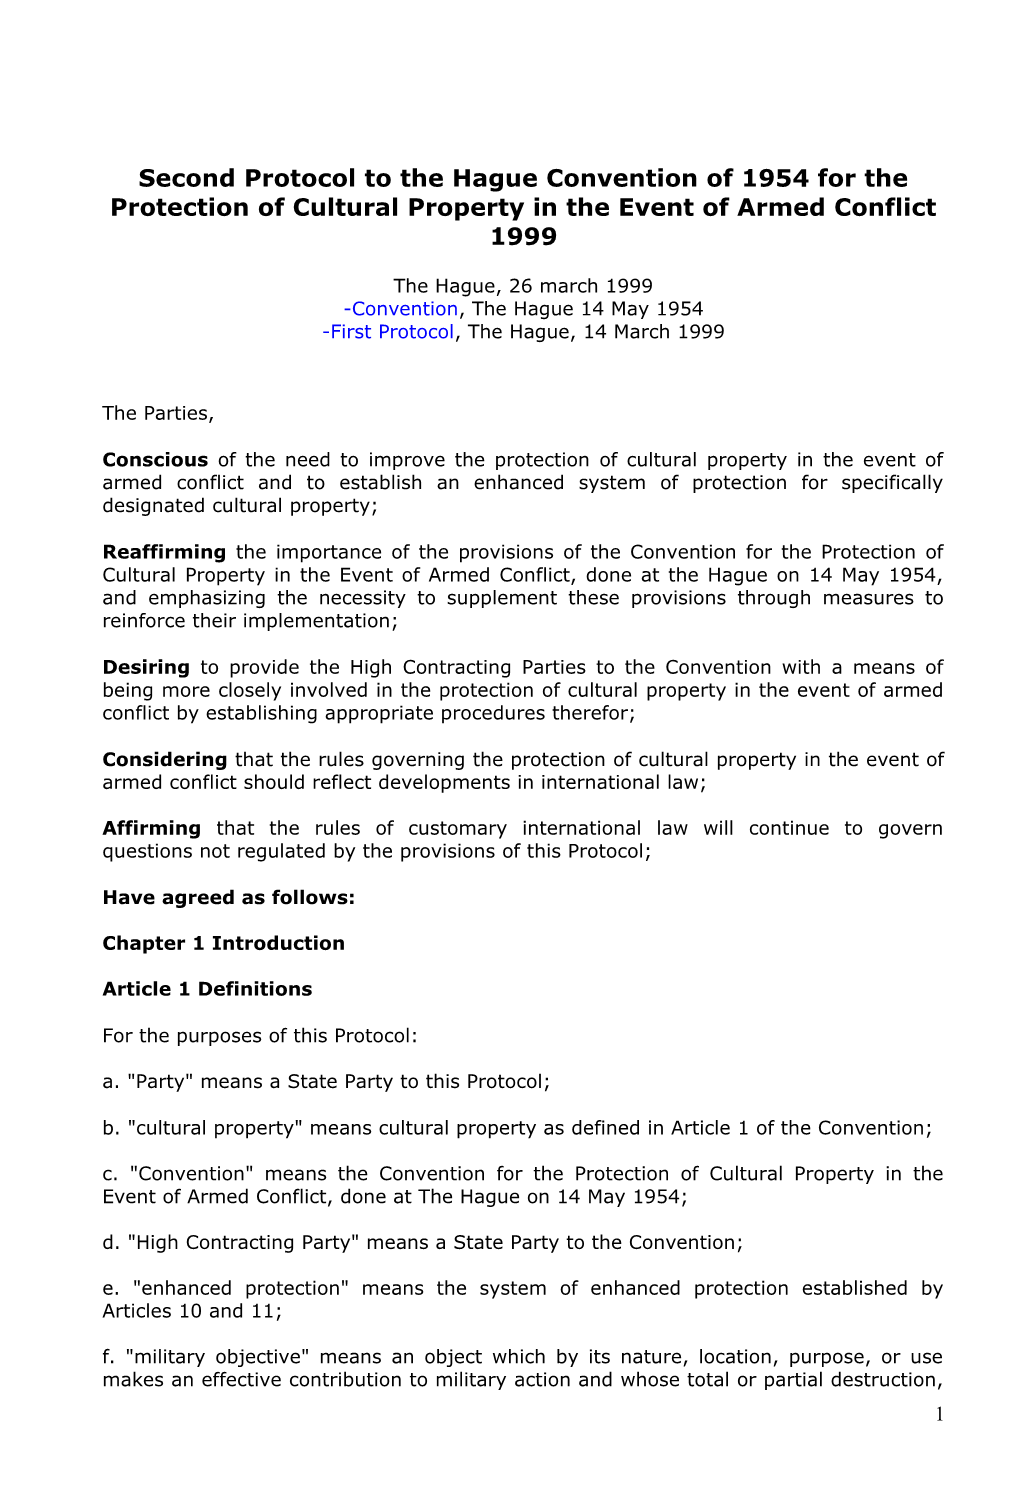 Second Protocol to the Hague Convention of 1954 for the Protection of Cultural Property